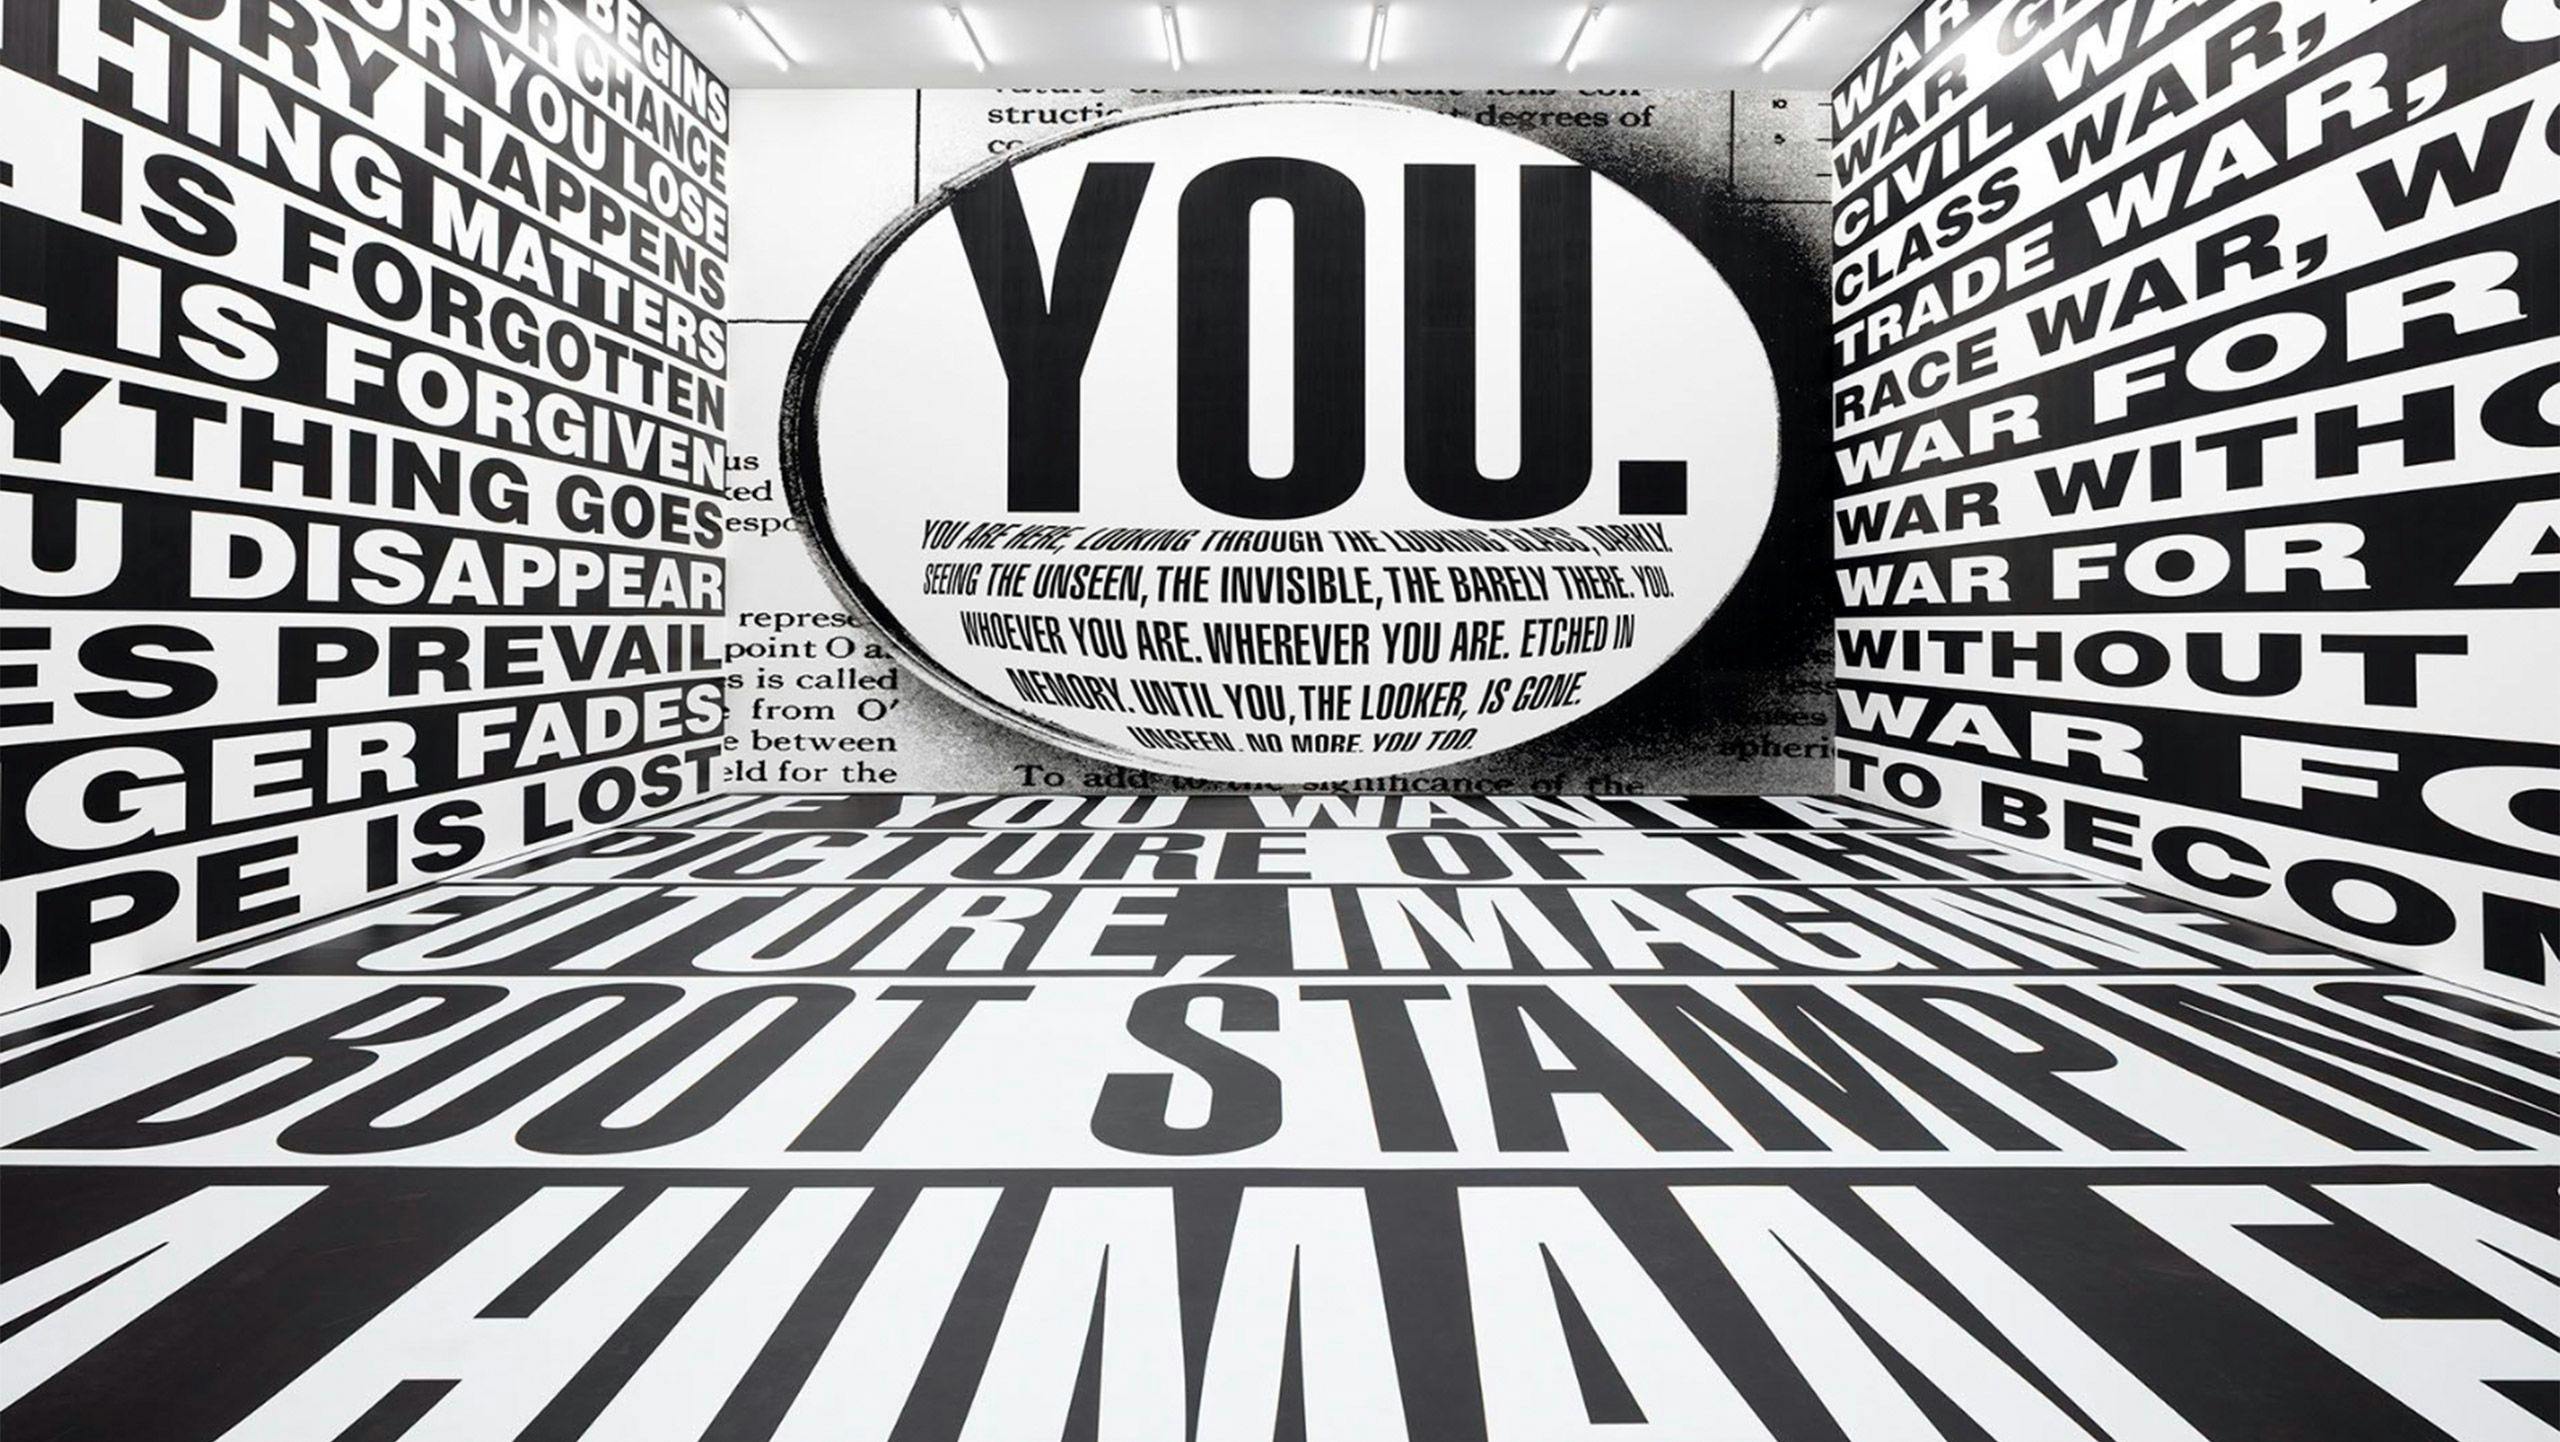 An installation by Barbara Kruger, called Untitled (Forever), dated 2017